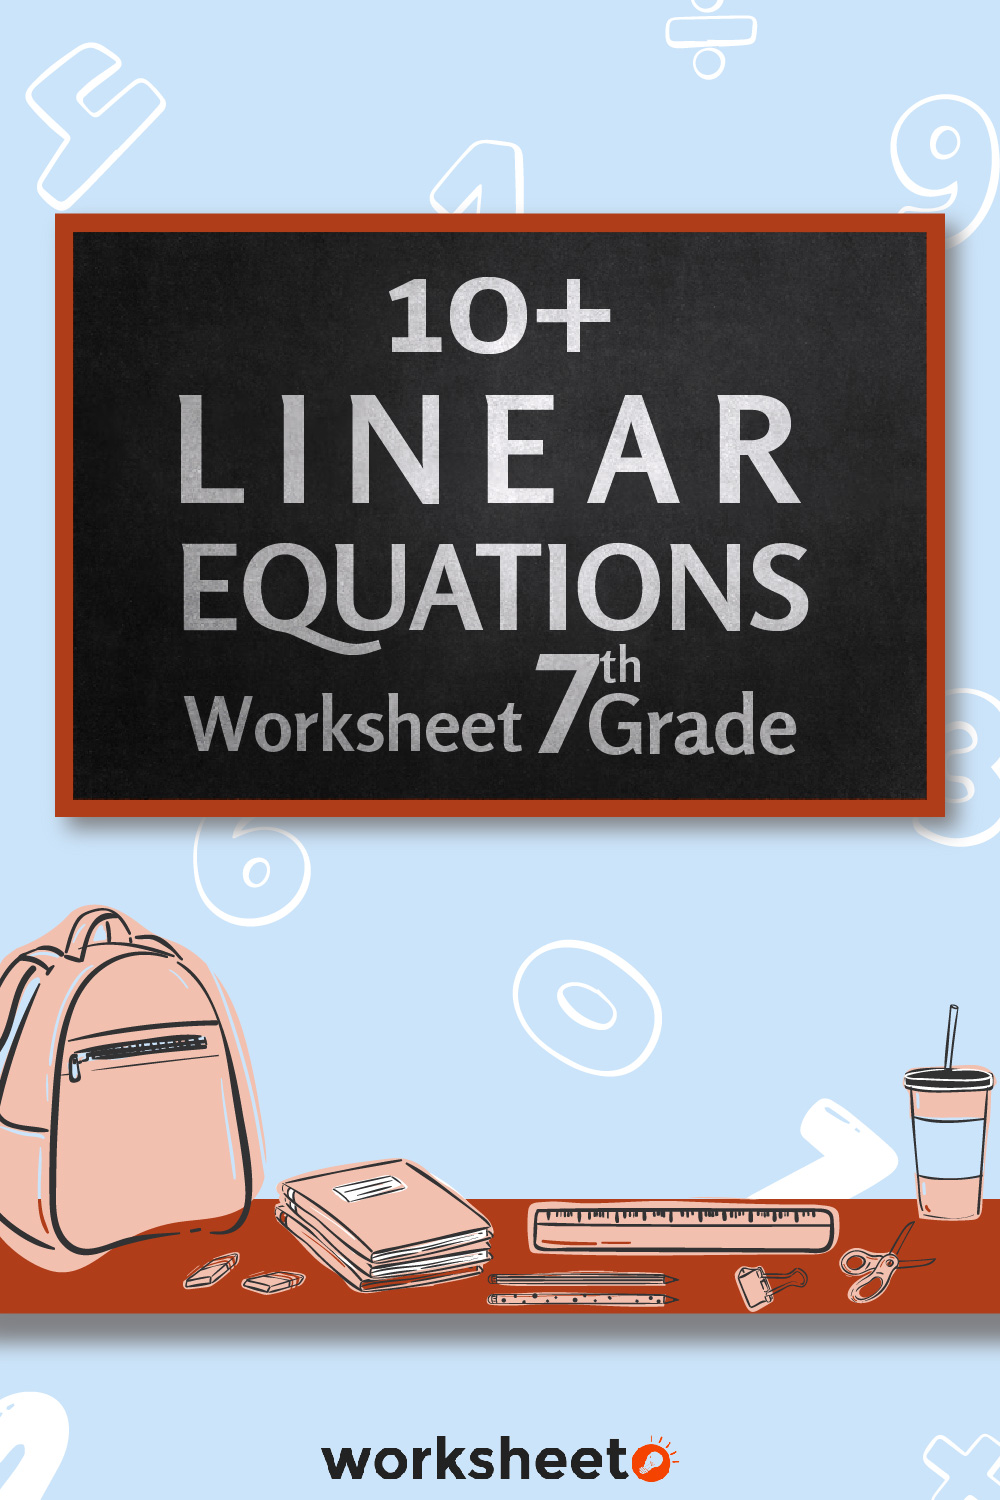 15 Images of Linear Equations Worksheet 7th Grade